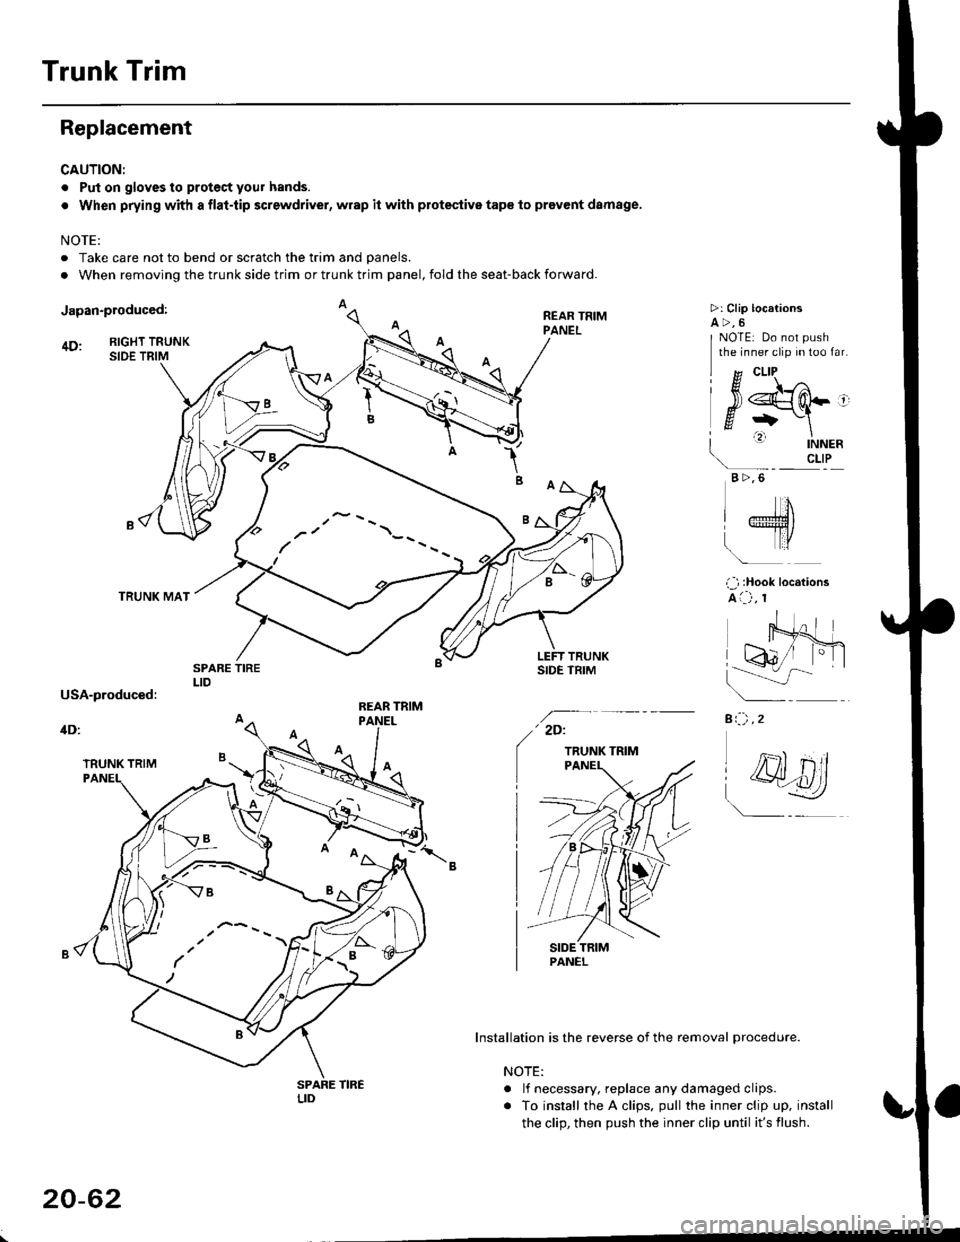 HONDA CIVIC 1996 6.G Workshop Manual Trunk Trim
Replacement
CAUTION:
. Put on gloves to proteci your hands.
. When prying with a flat-tip screwdriver, wrap it with protestive tap€ lo prevent damage.
NOTE:
. Take care not to bend or scr